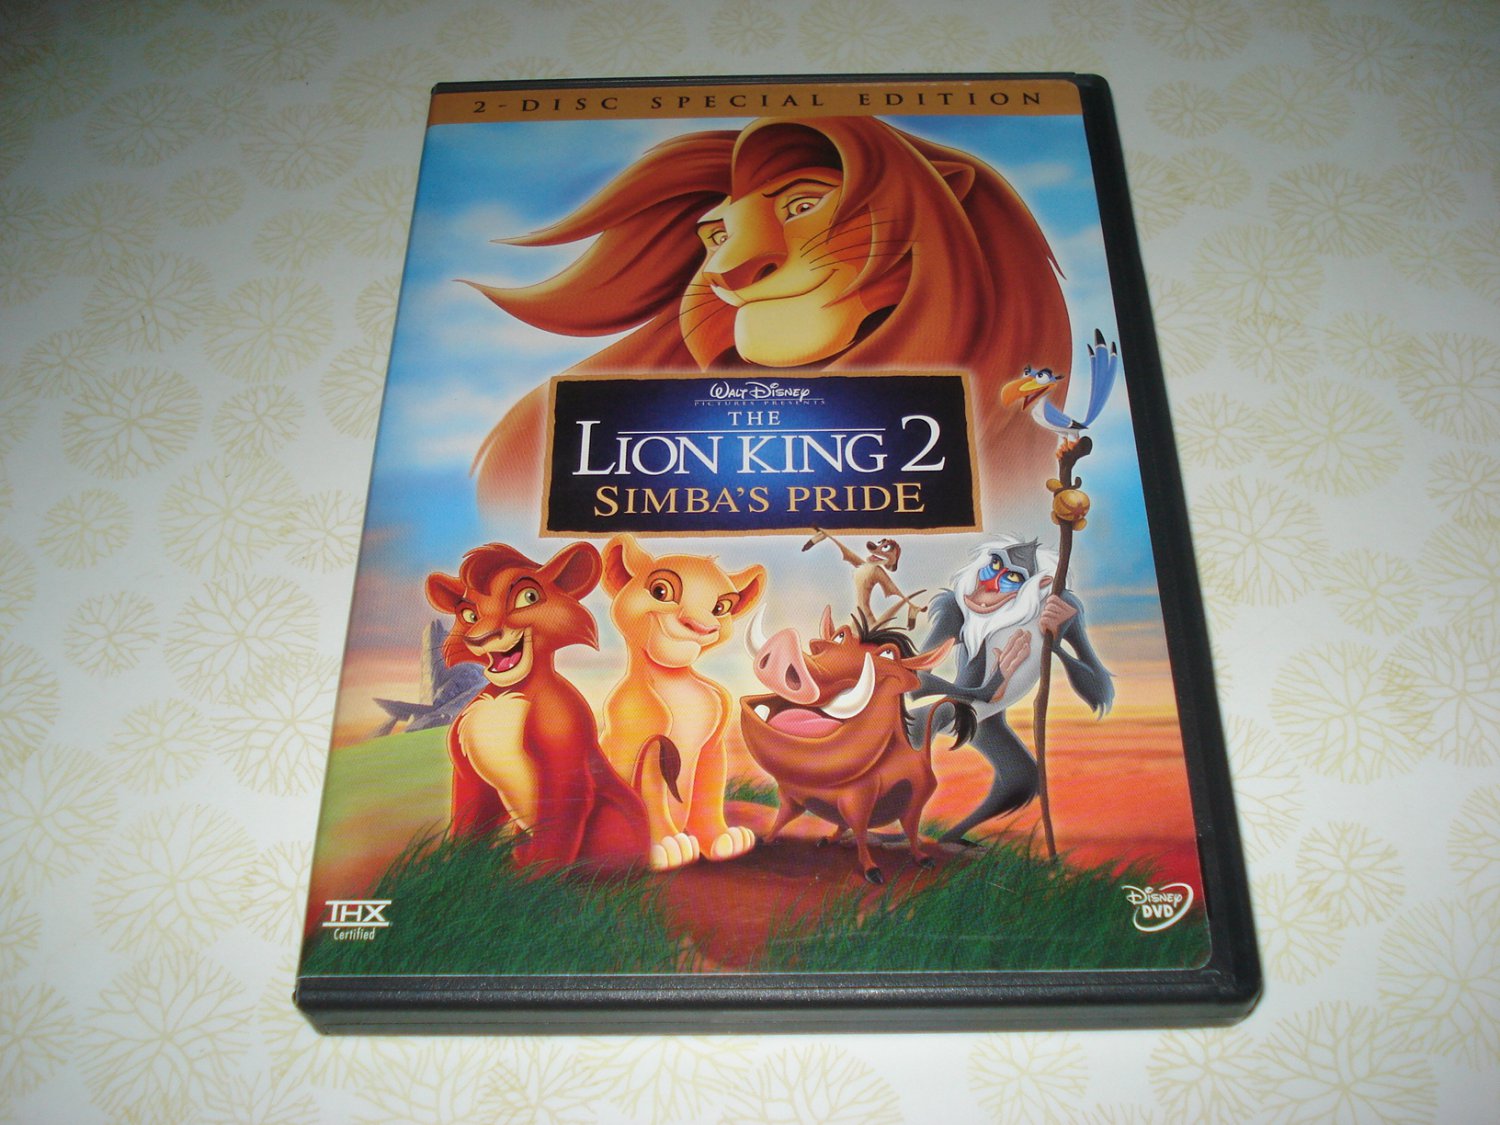 The Lion King 2 Simba's Pride Two Disc Special Edition DVD Set